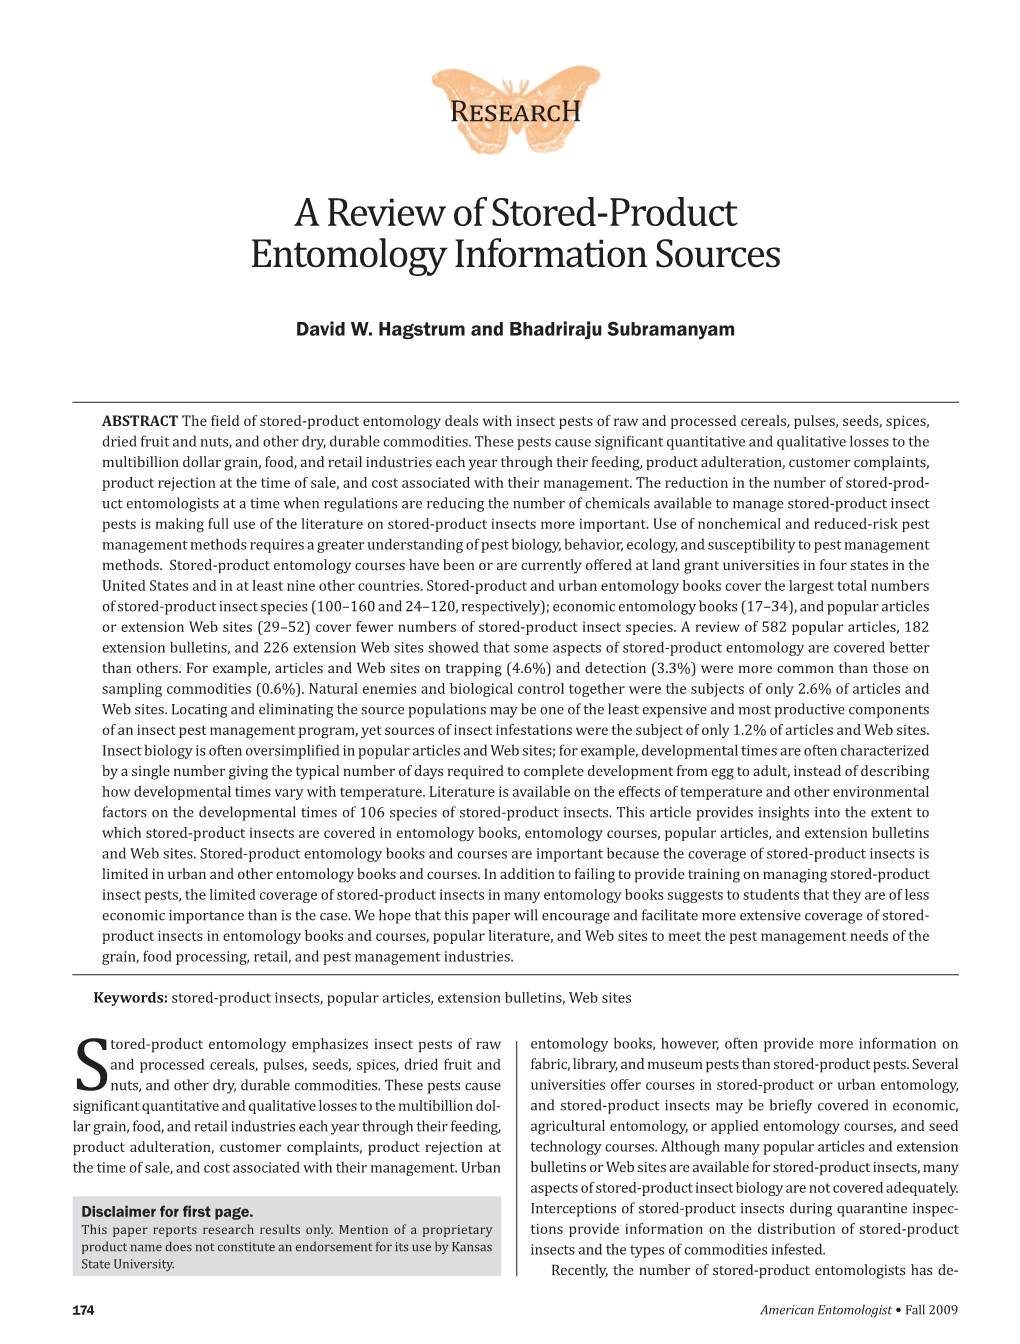 A Review of Stored-Product Entomology Information Sources